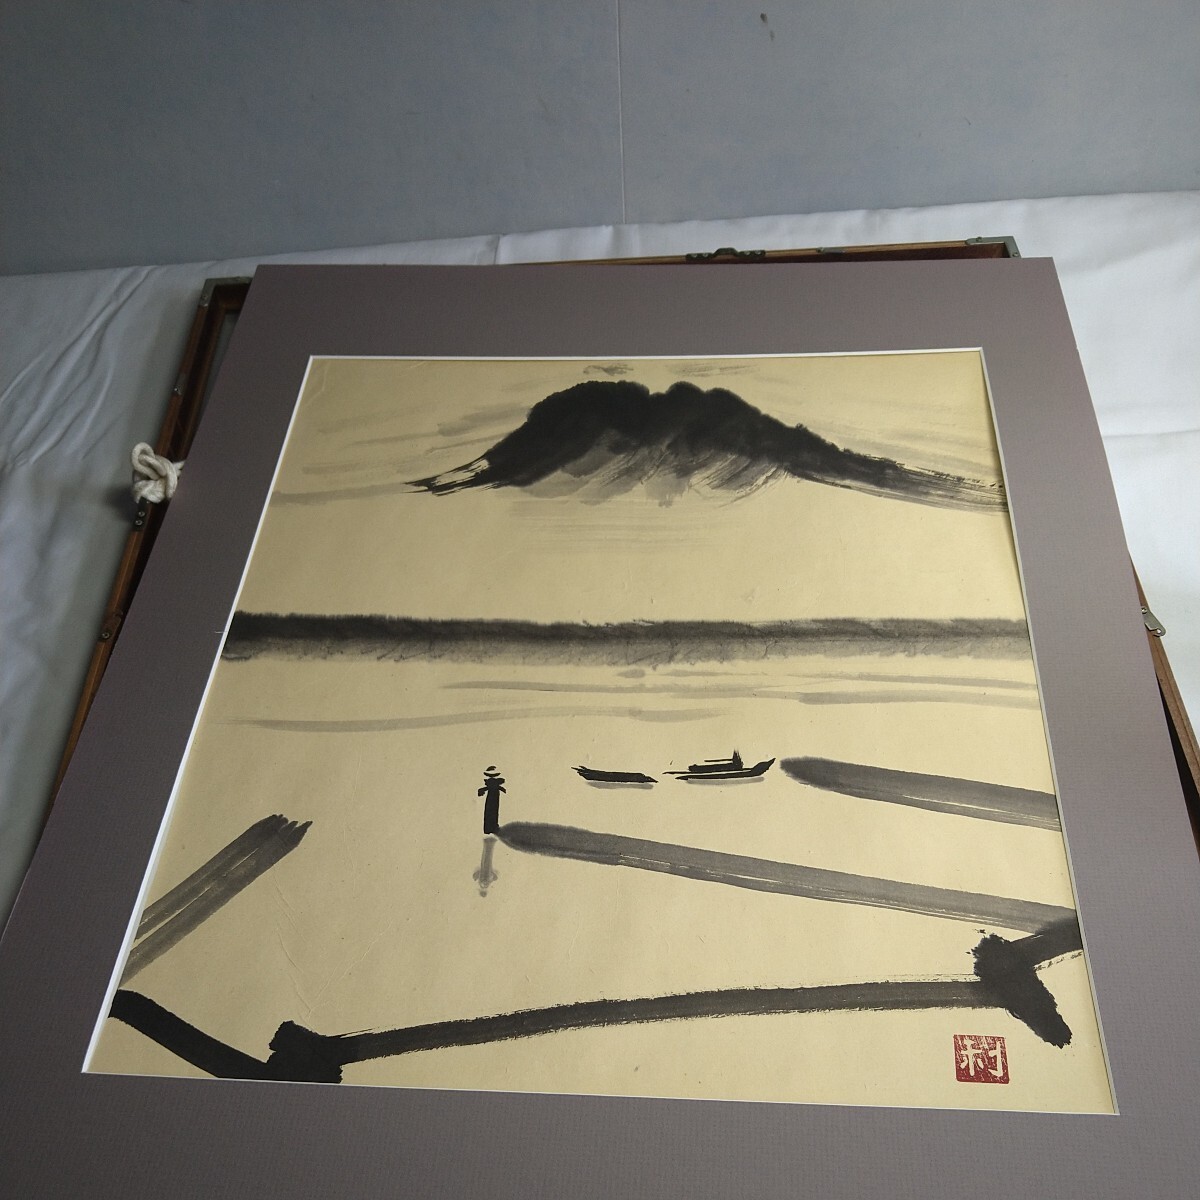 a-1459*[ genuine work ] water ink picture scenery Mt Fuji autograph equipped frame amount size length 67.5cm width 52.5cm paper .* condition is in the image please confirm 